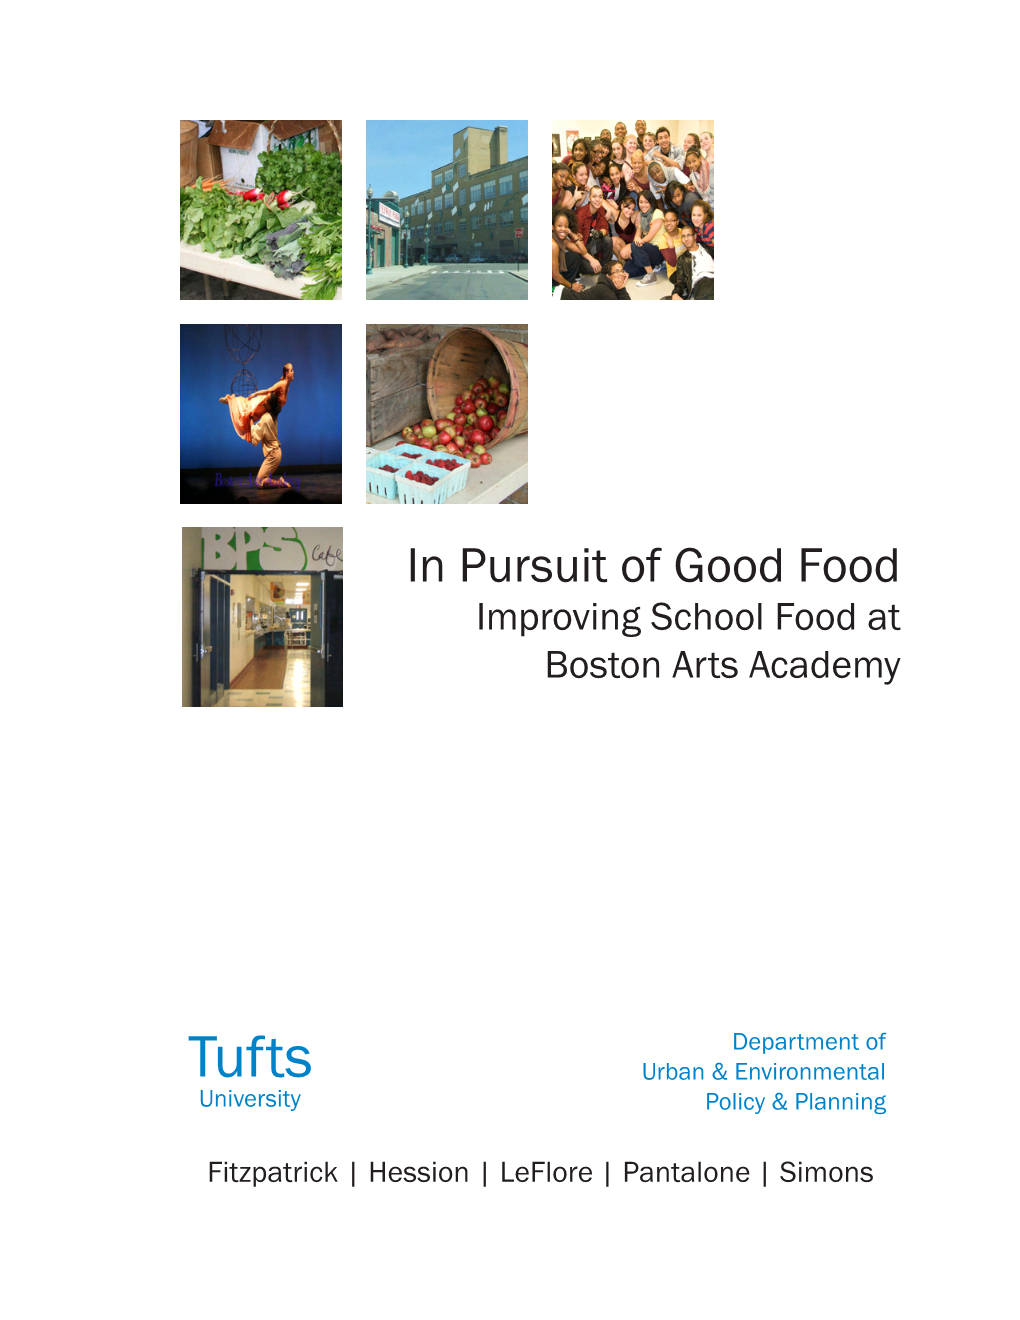 In Pursuit of Good Food Improving School Food at Boston Arts Academy